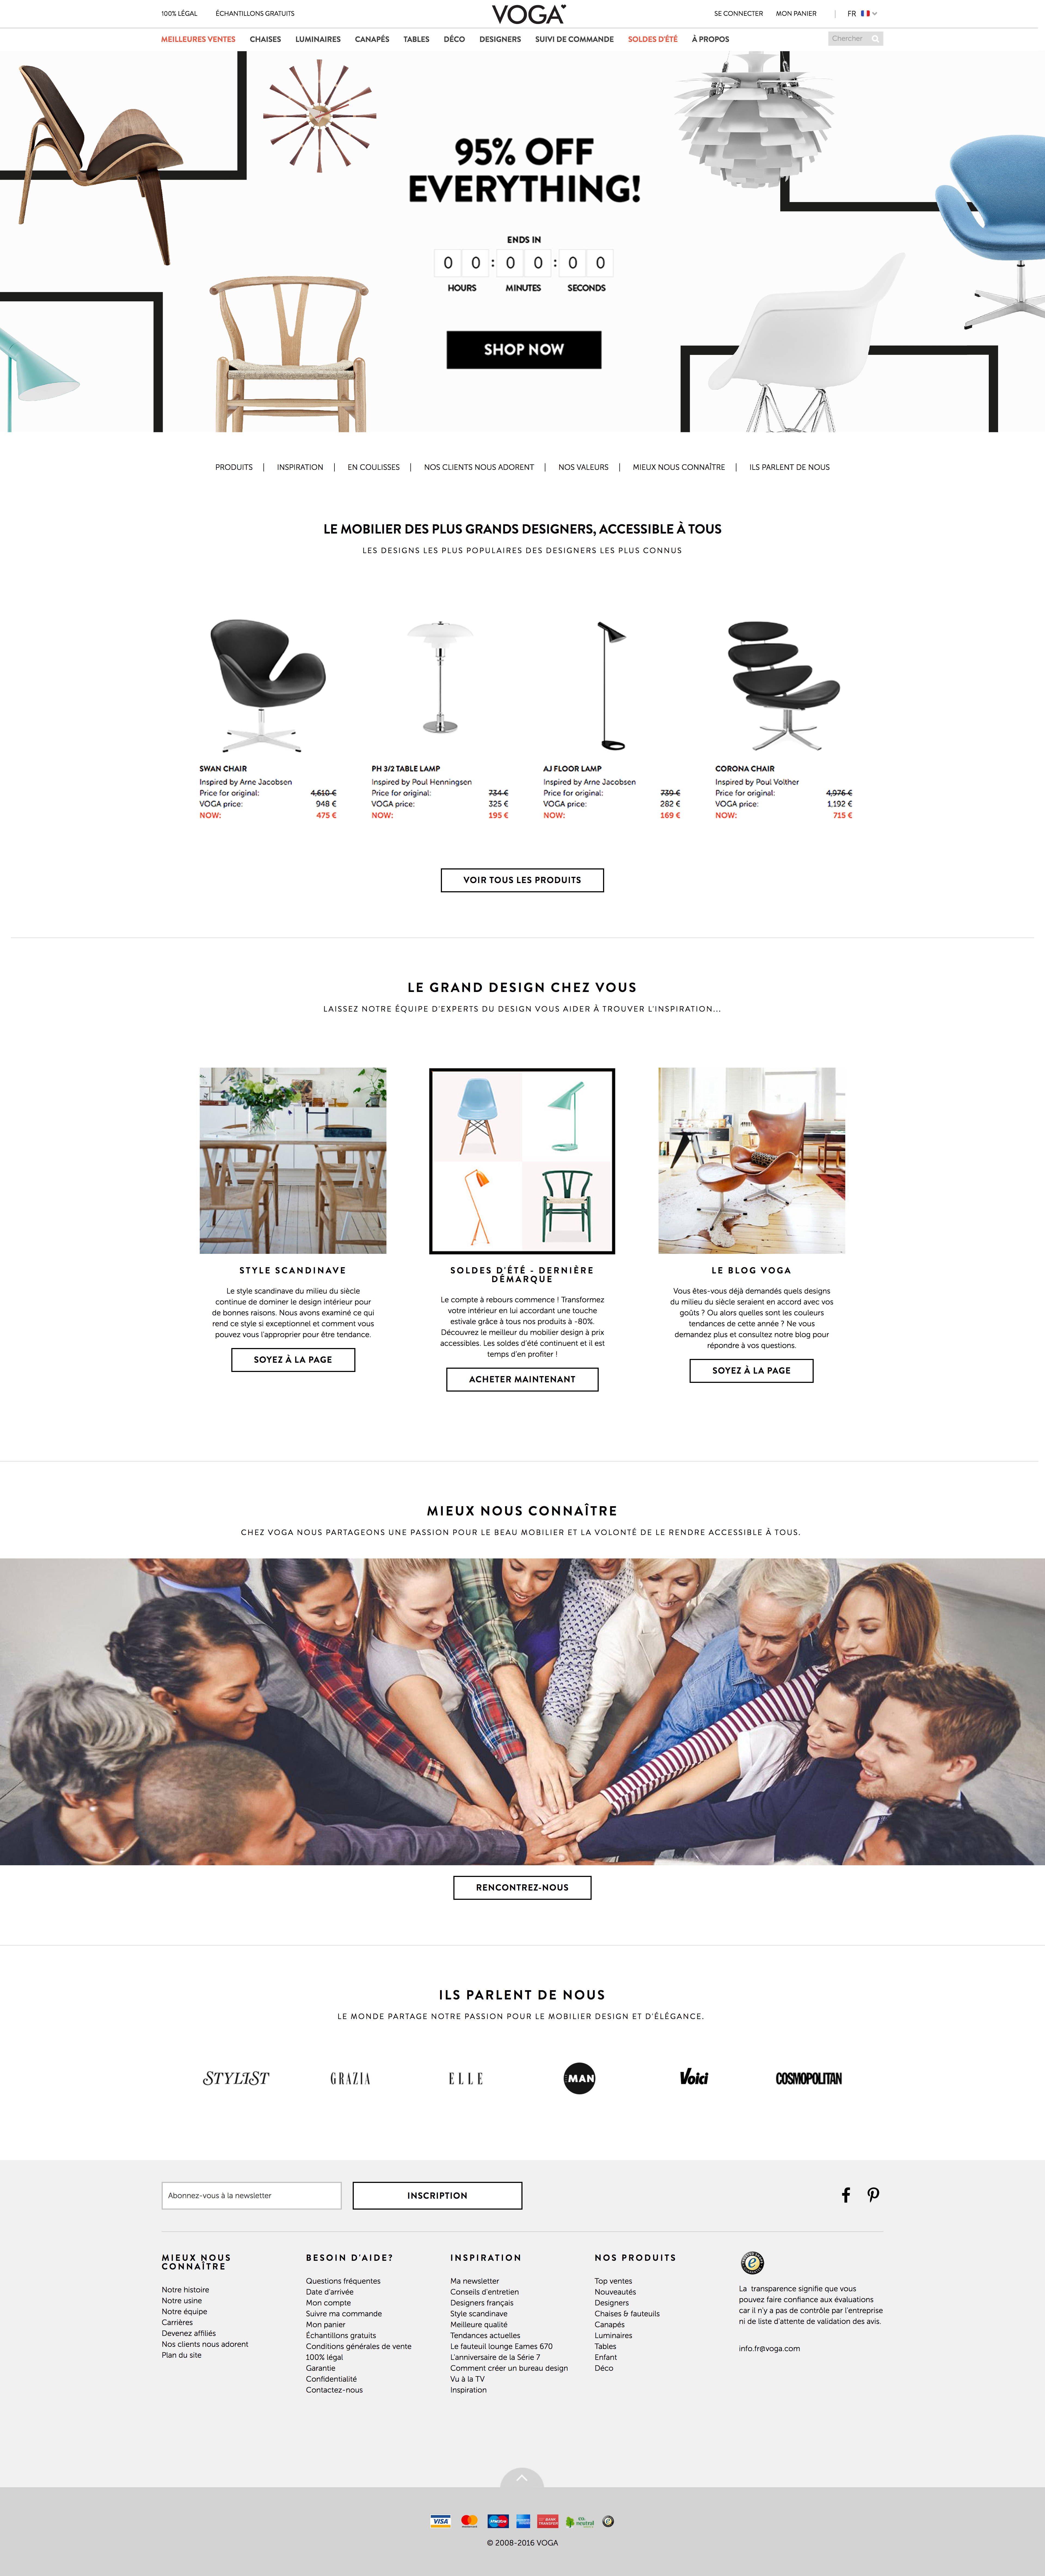 Webdesign voga homepage, graphic design with ux